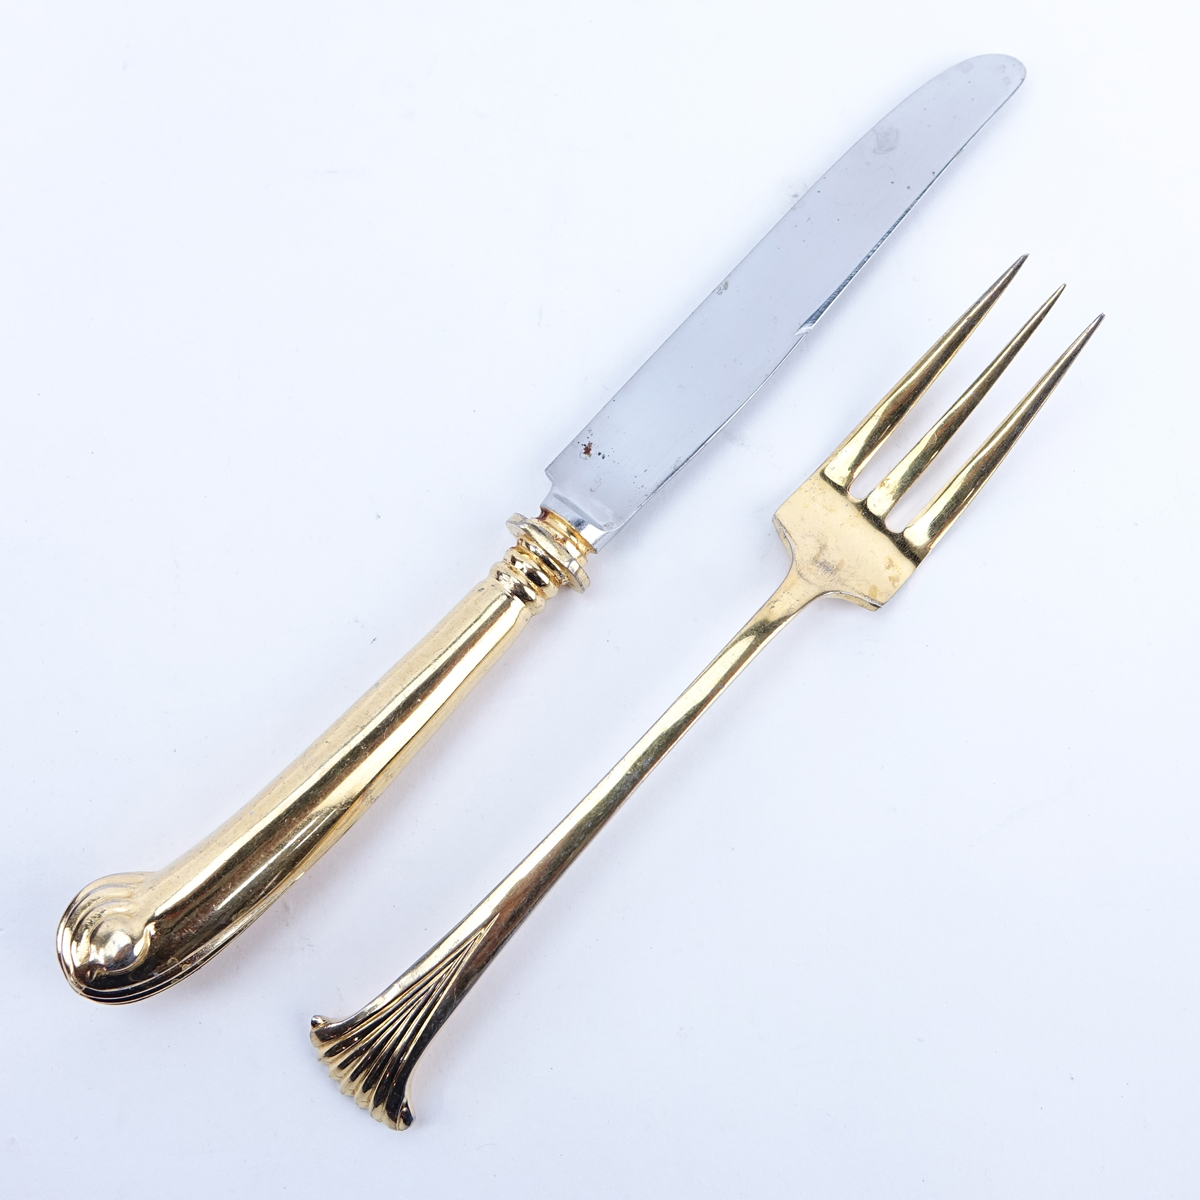 Ninety Eight (98) Pieces Oxford House Gold Plated Stainless Flatware. Set includes: 12 forks 7-1/4", 17 knives 9-1/2", 16 salad forks, 7 soup spoons, 9 teaspoons, 12 cocktail forks, 20 butter paddles, meat fork, slotted spoon, pie server, 2 serving spoons